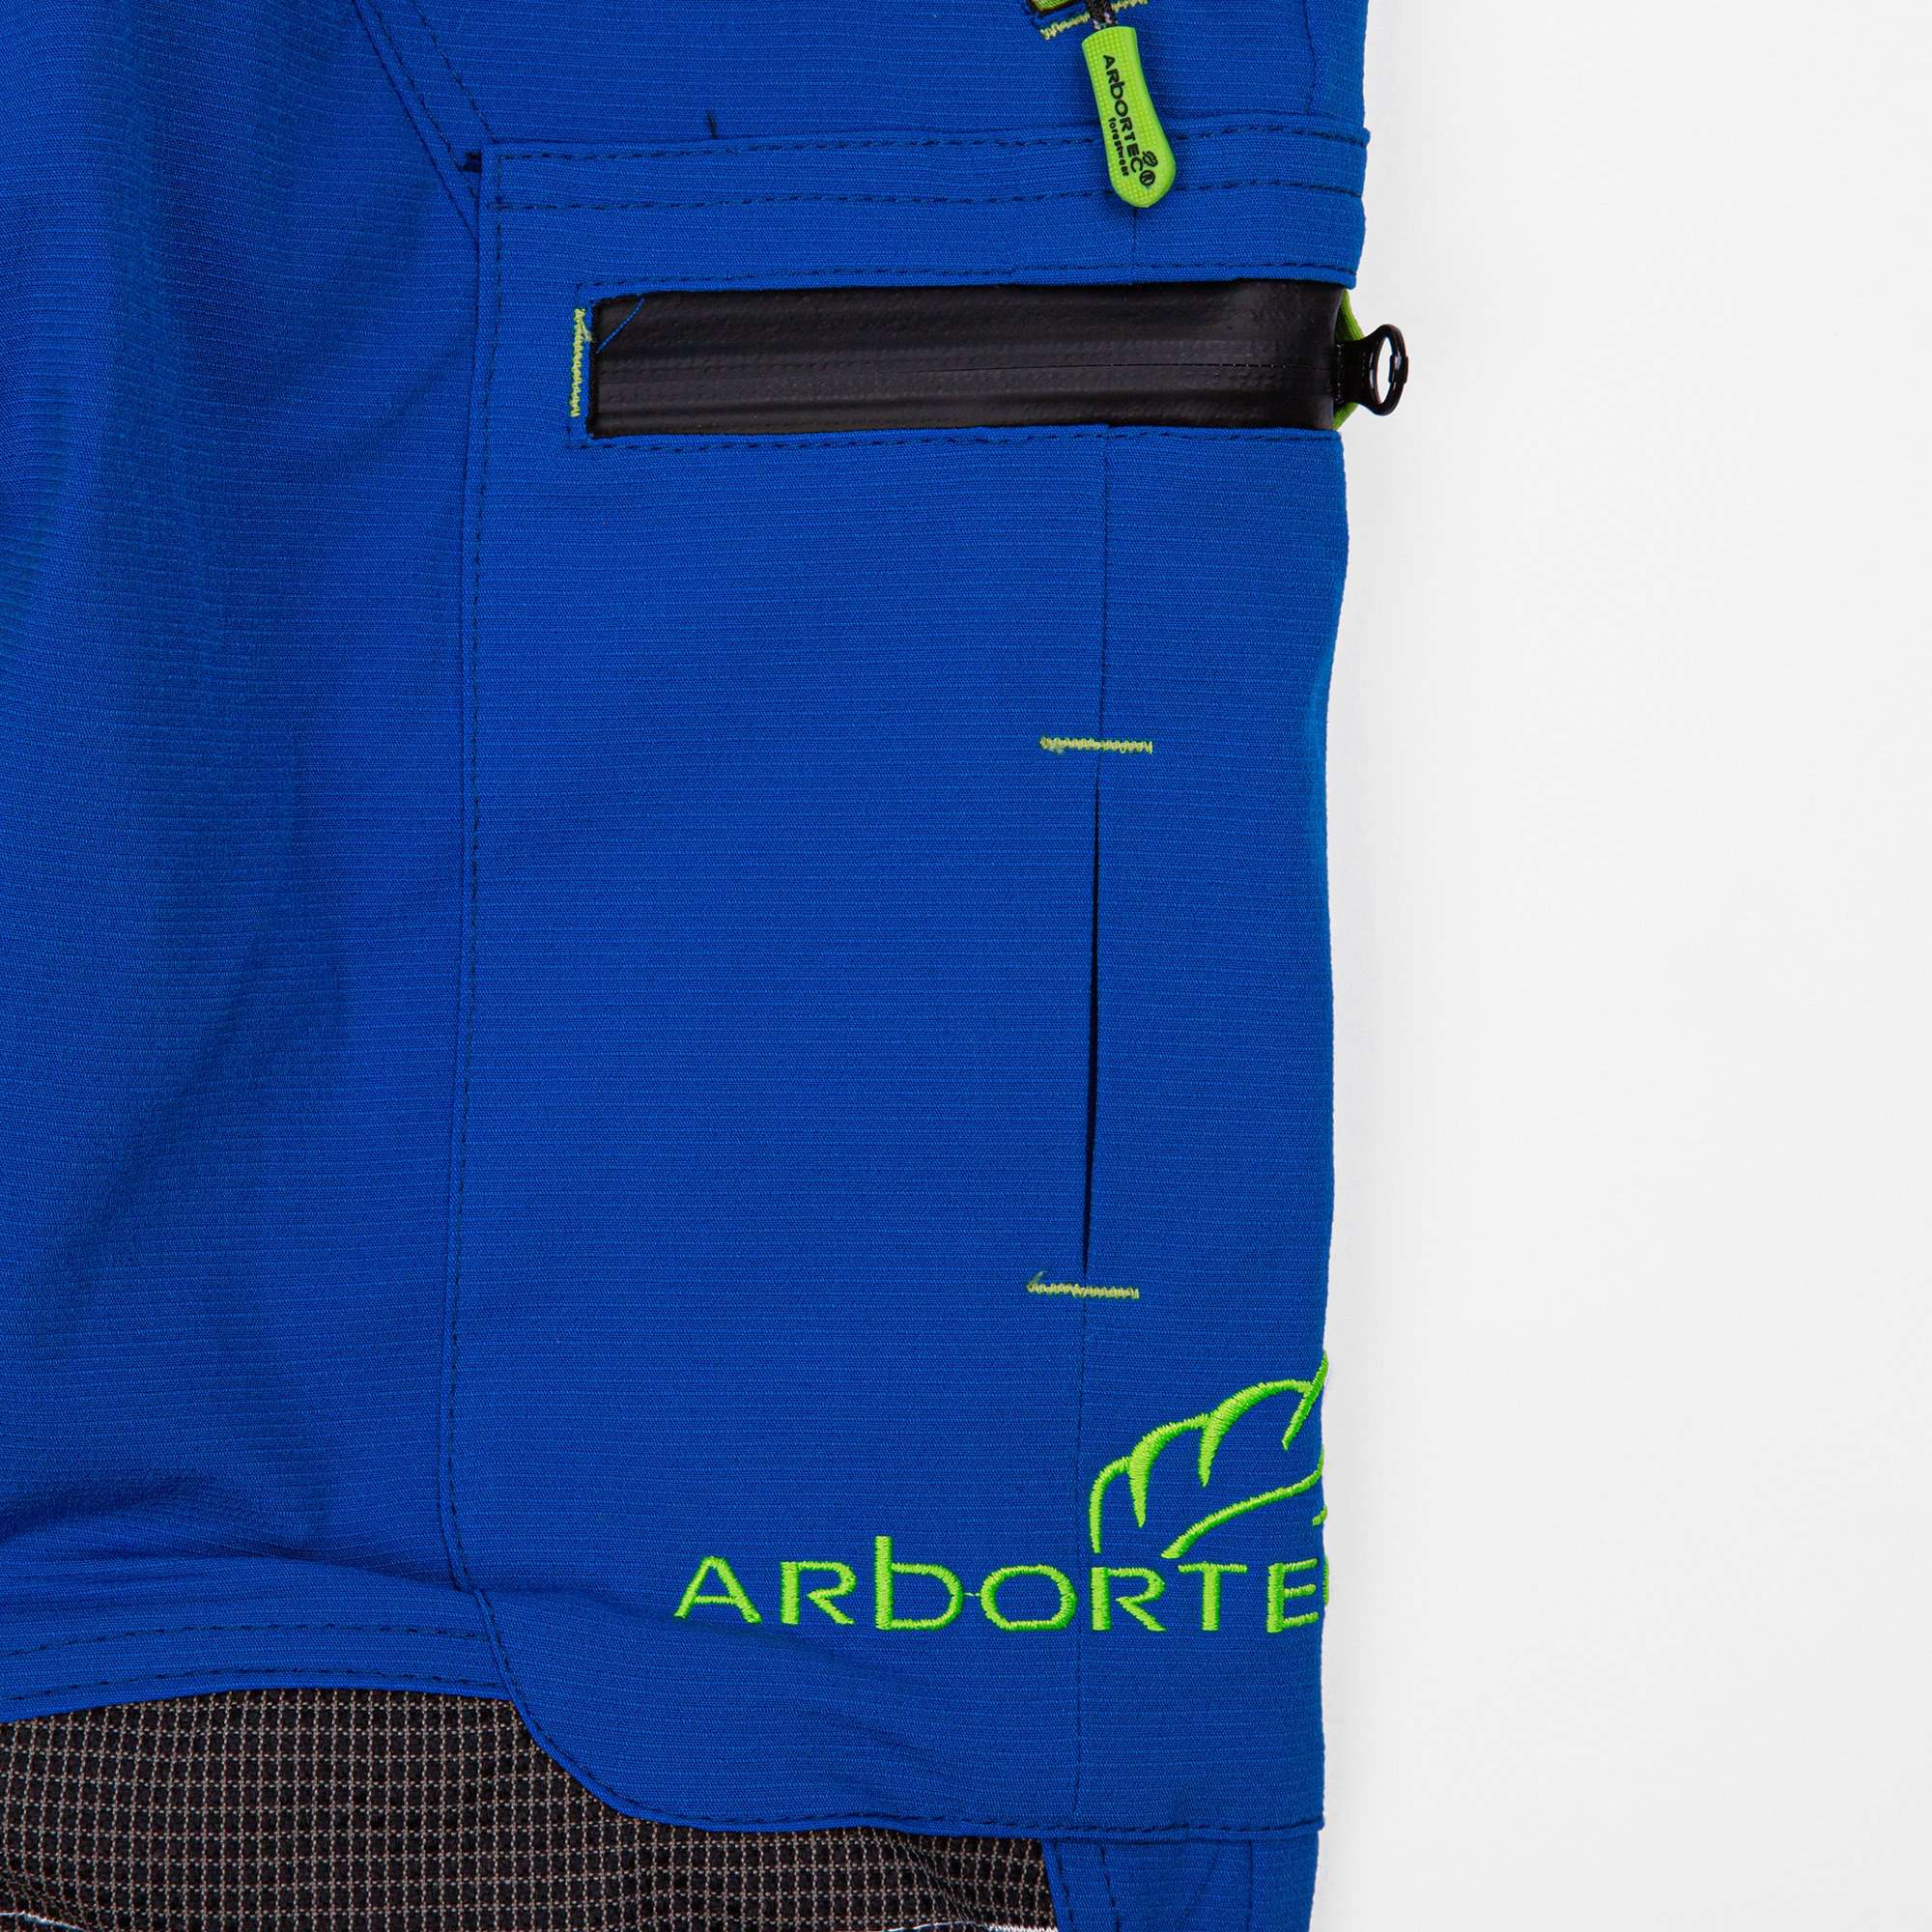 AT4060 Breatheflex Pro Type A Class 1 Chainsaw Trousers - Blue - Arbortec Forestwear